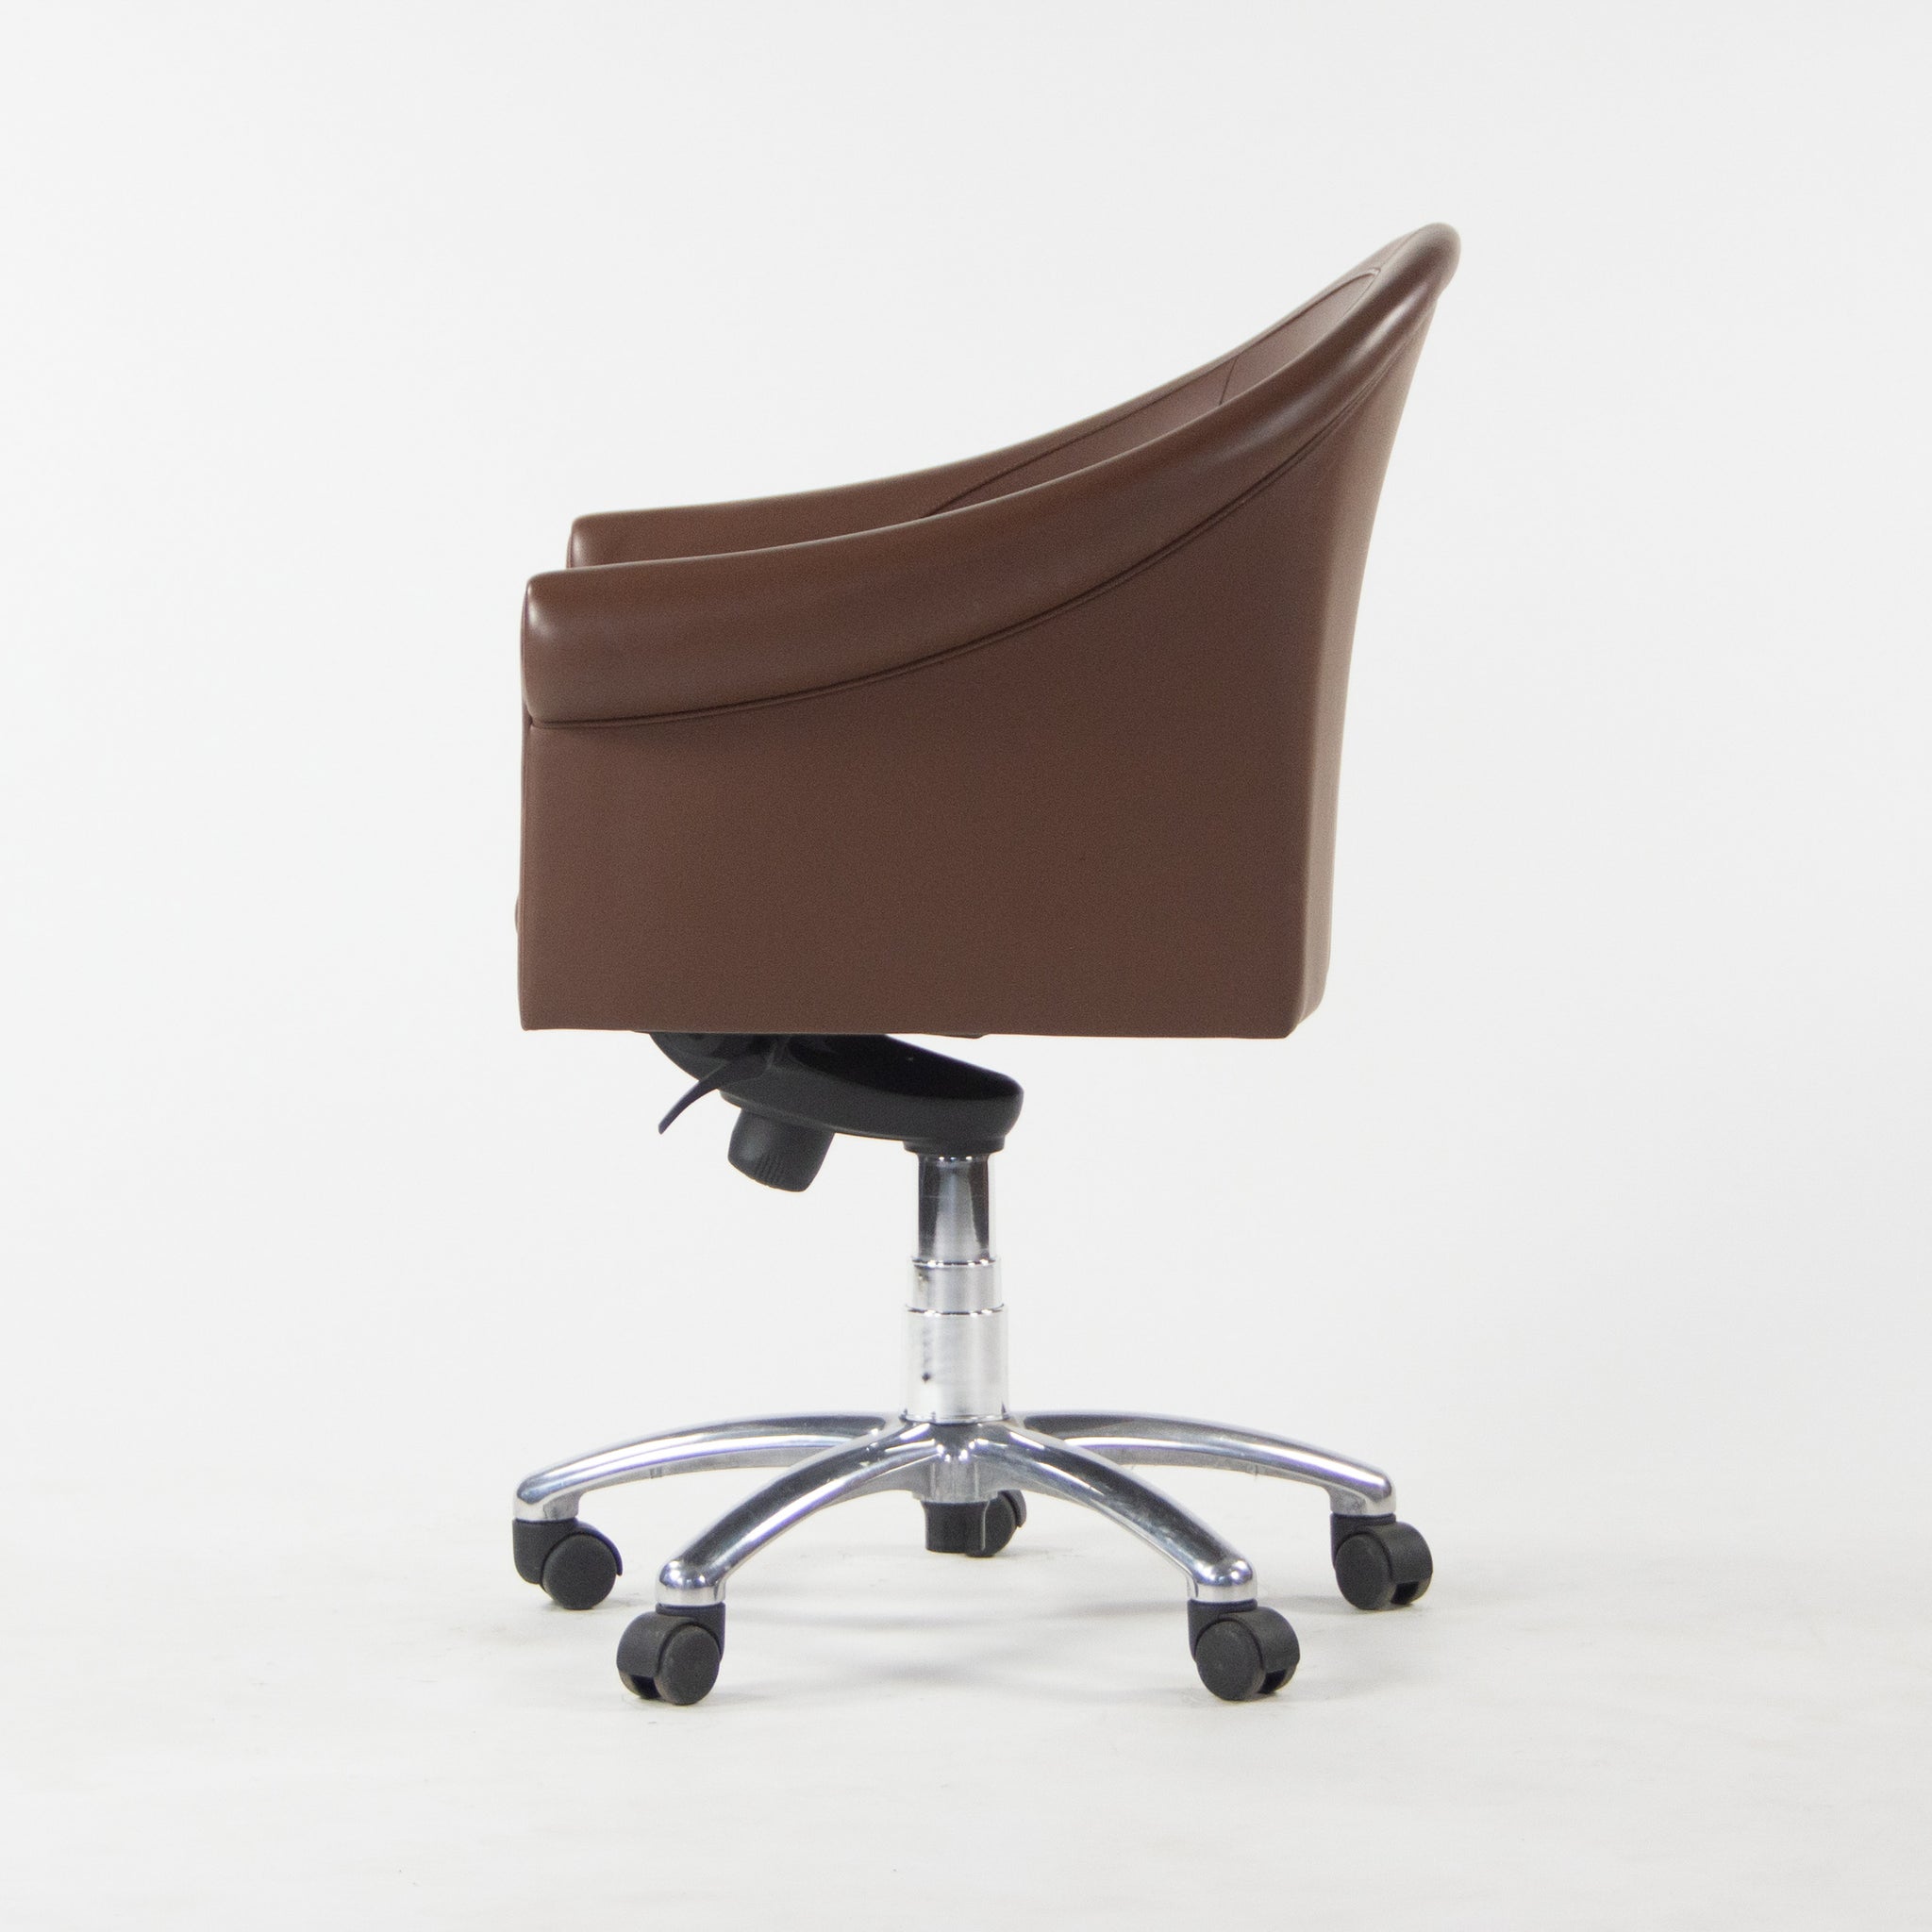 SOLD Poltrona Frau Brown Leather Luca Scacchetti Sinan Office Desk Chair Two Available